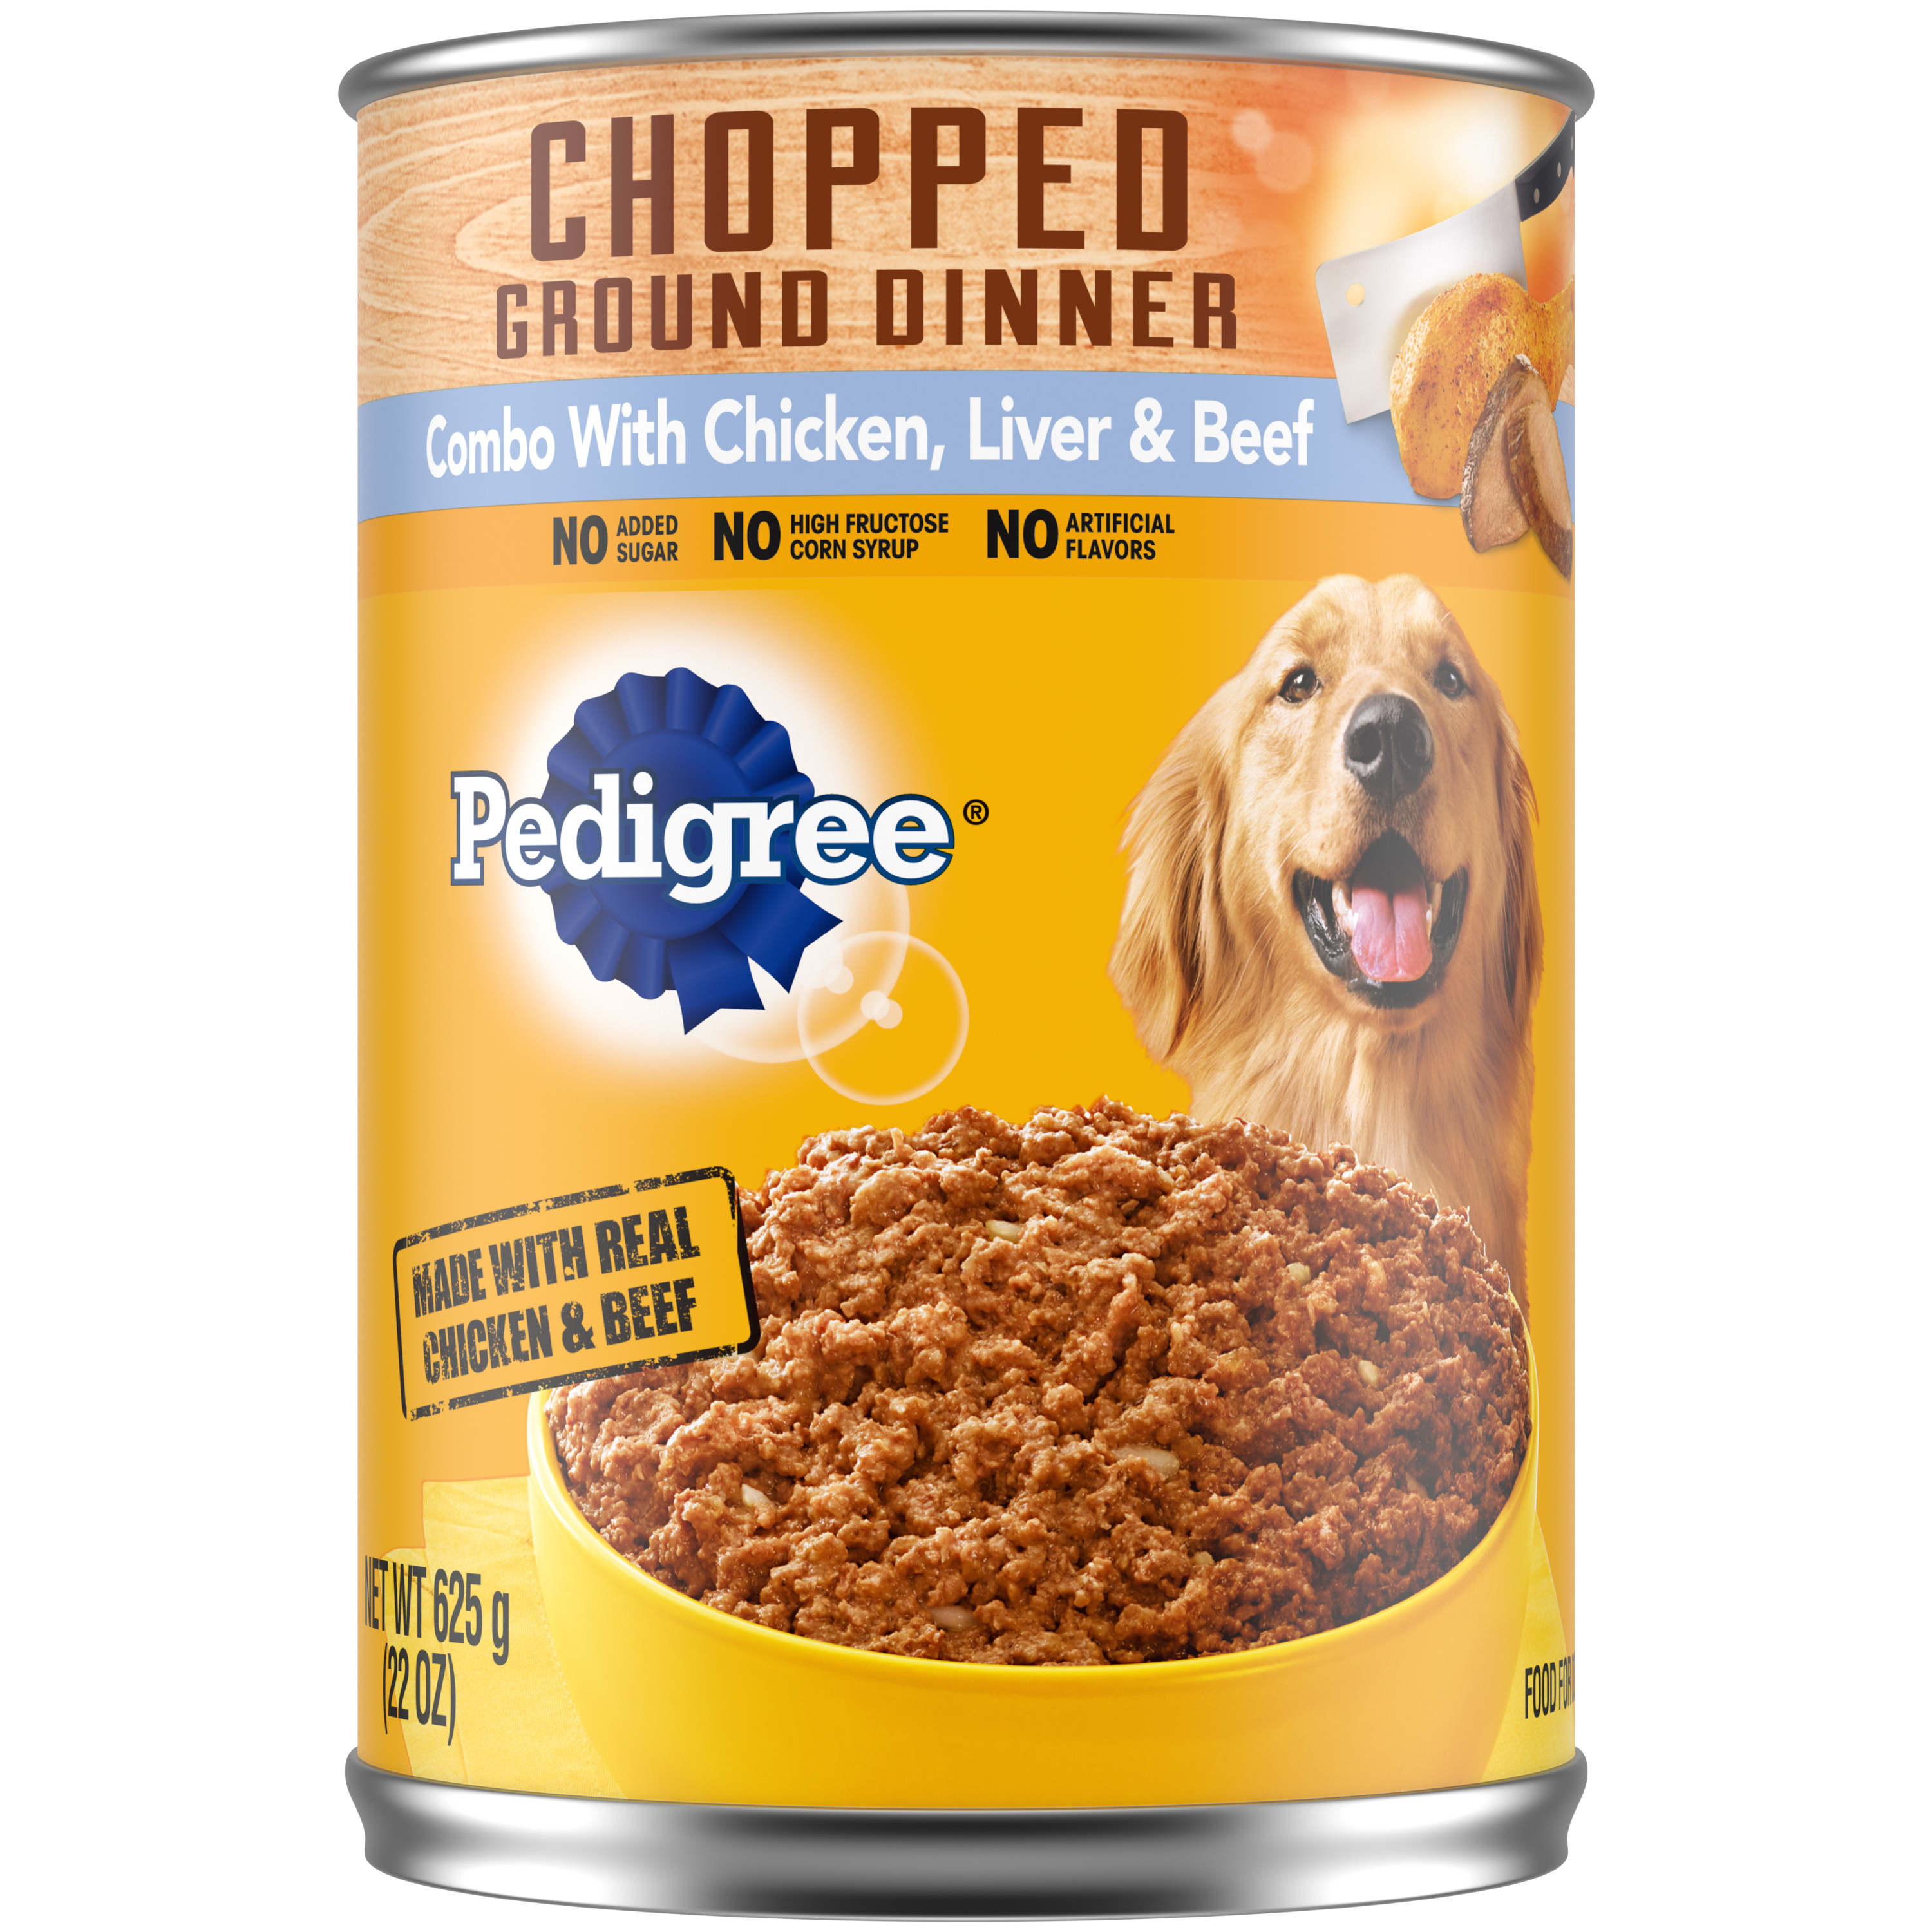 12/22 oz. Pedigree Traditional Ground Dinner Chopped Combo - Health/First Aid